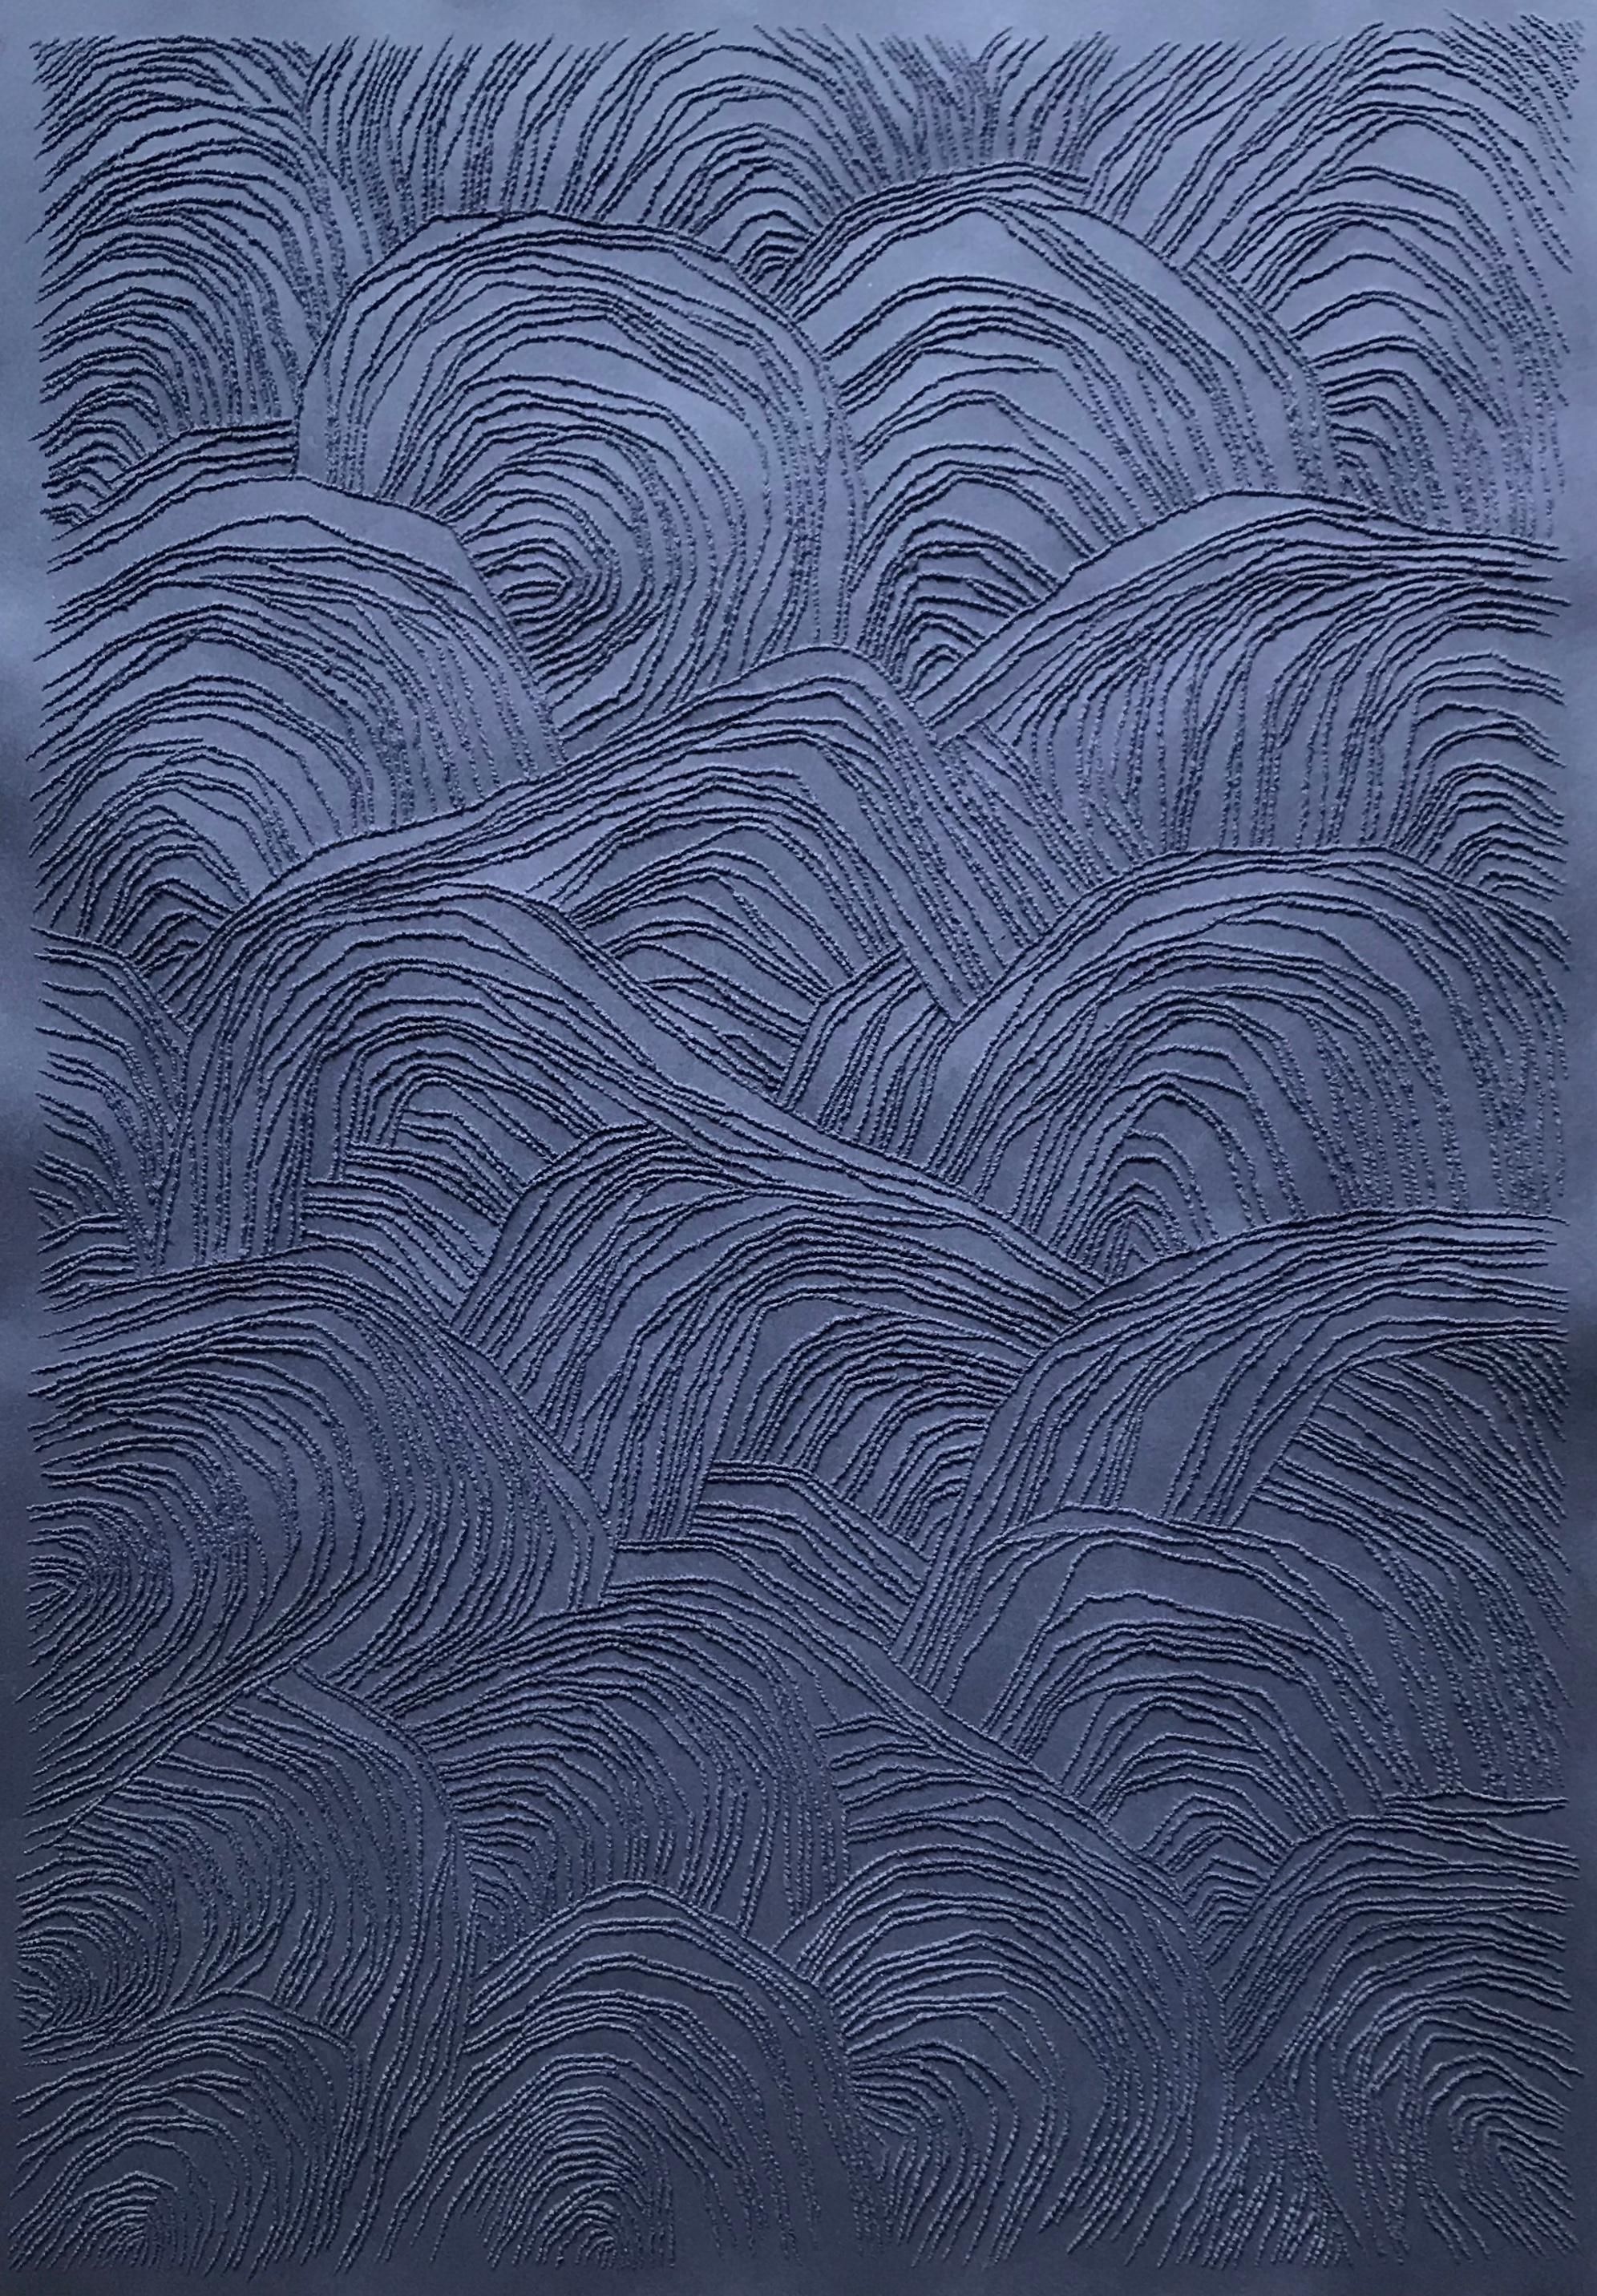 Antonin Anzil Abstract Sculpture - Blue 1 - intricate blue 3D abstract landscape drypoint drawing on paper 